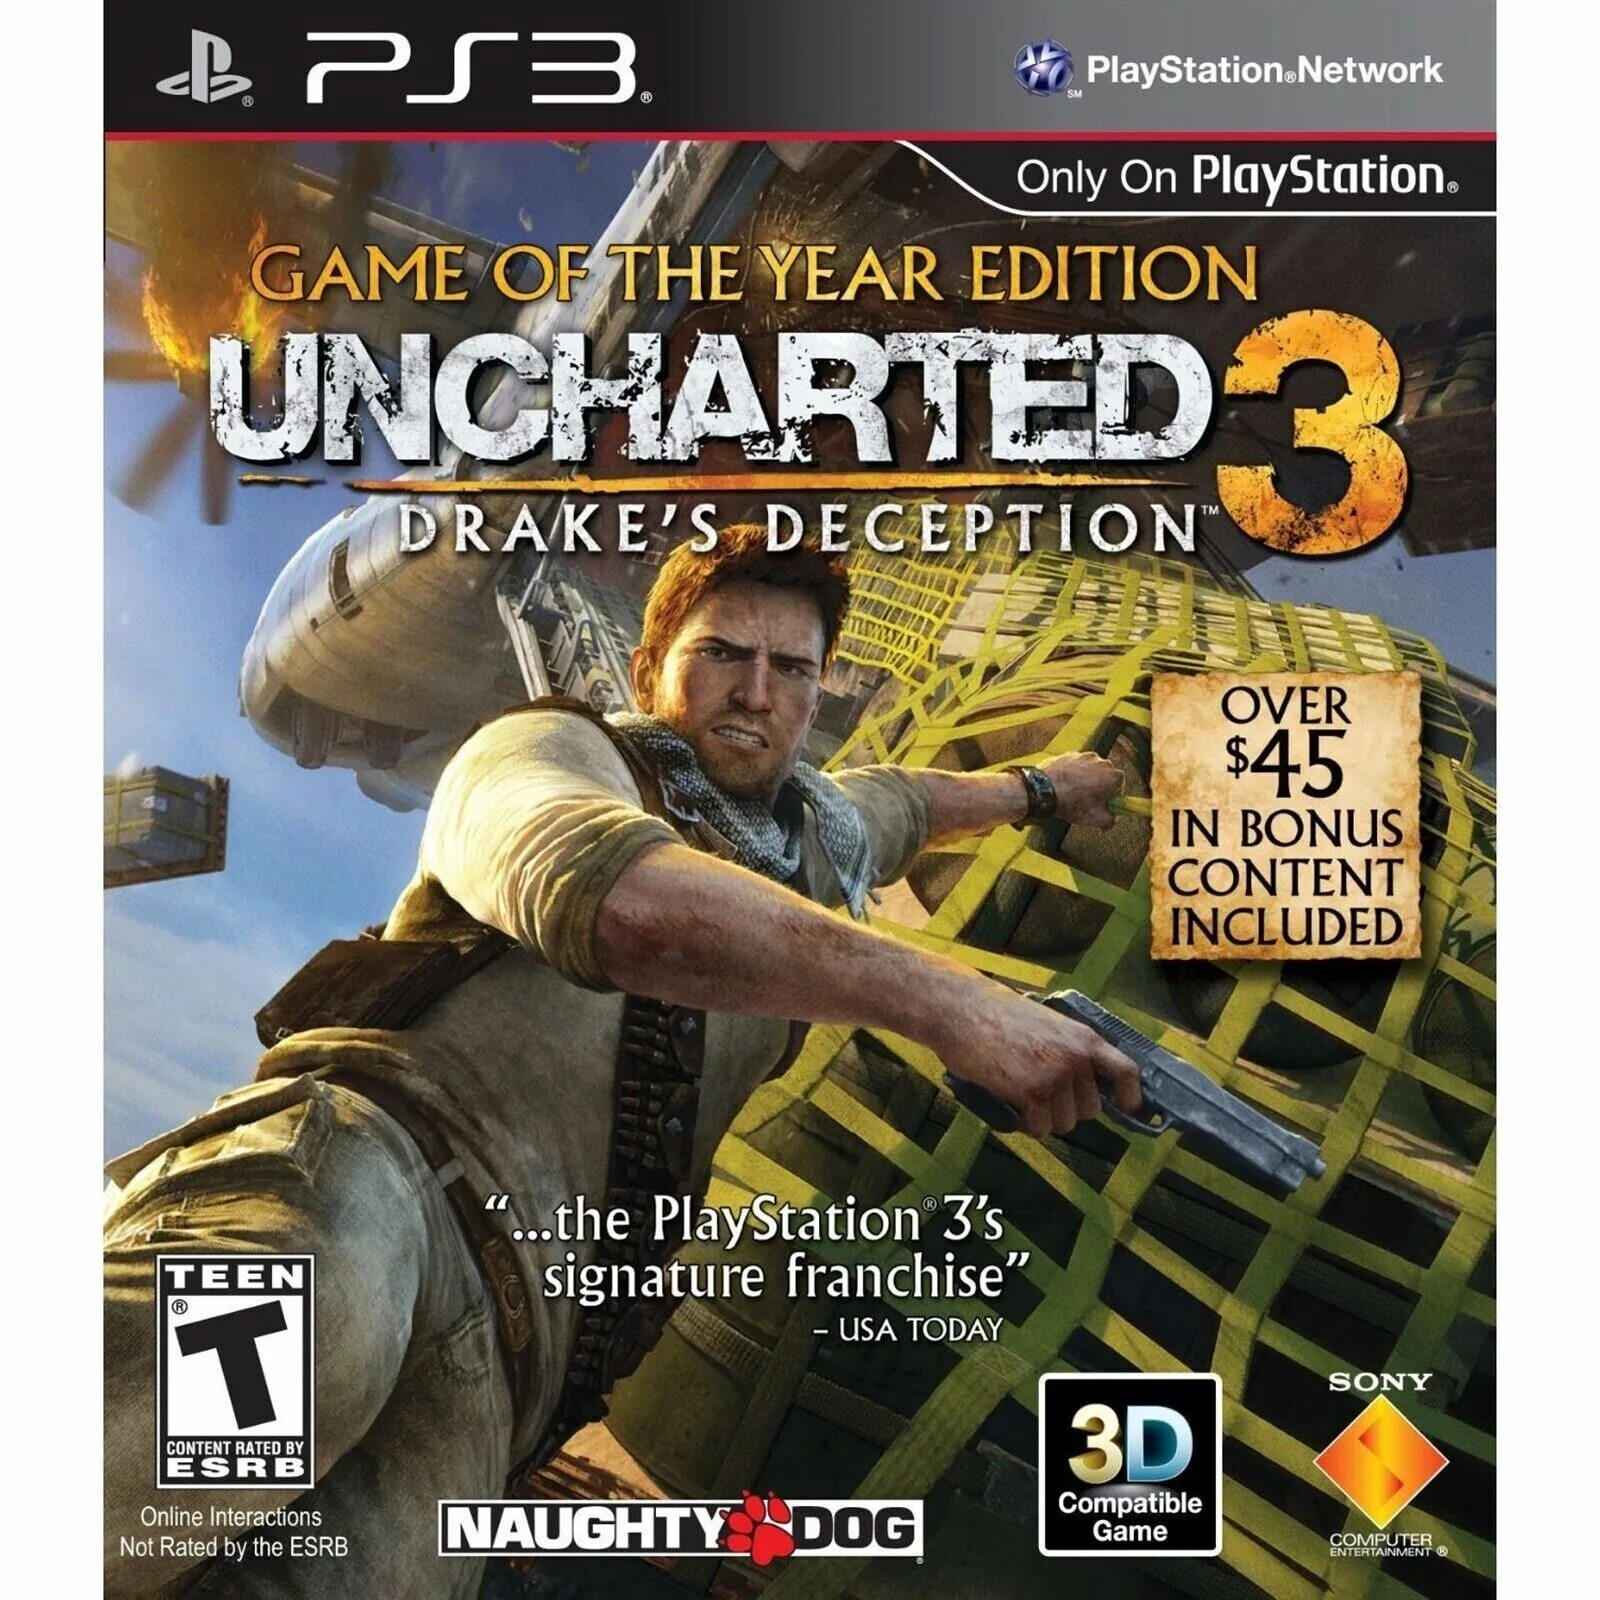 Игры game of the year edition. Uncharted 3 ps3. Uncharted игра на пс3. Uncharted 3 иллюзии Дрейка ps3. Uncharted 3 ps3 диск.